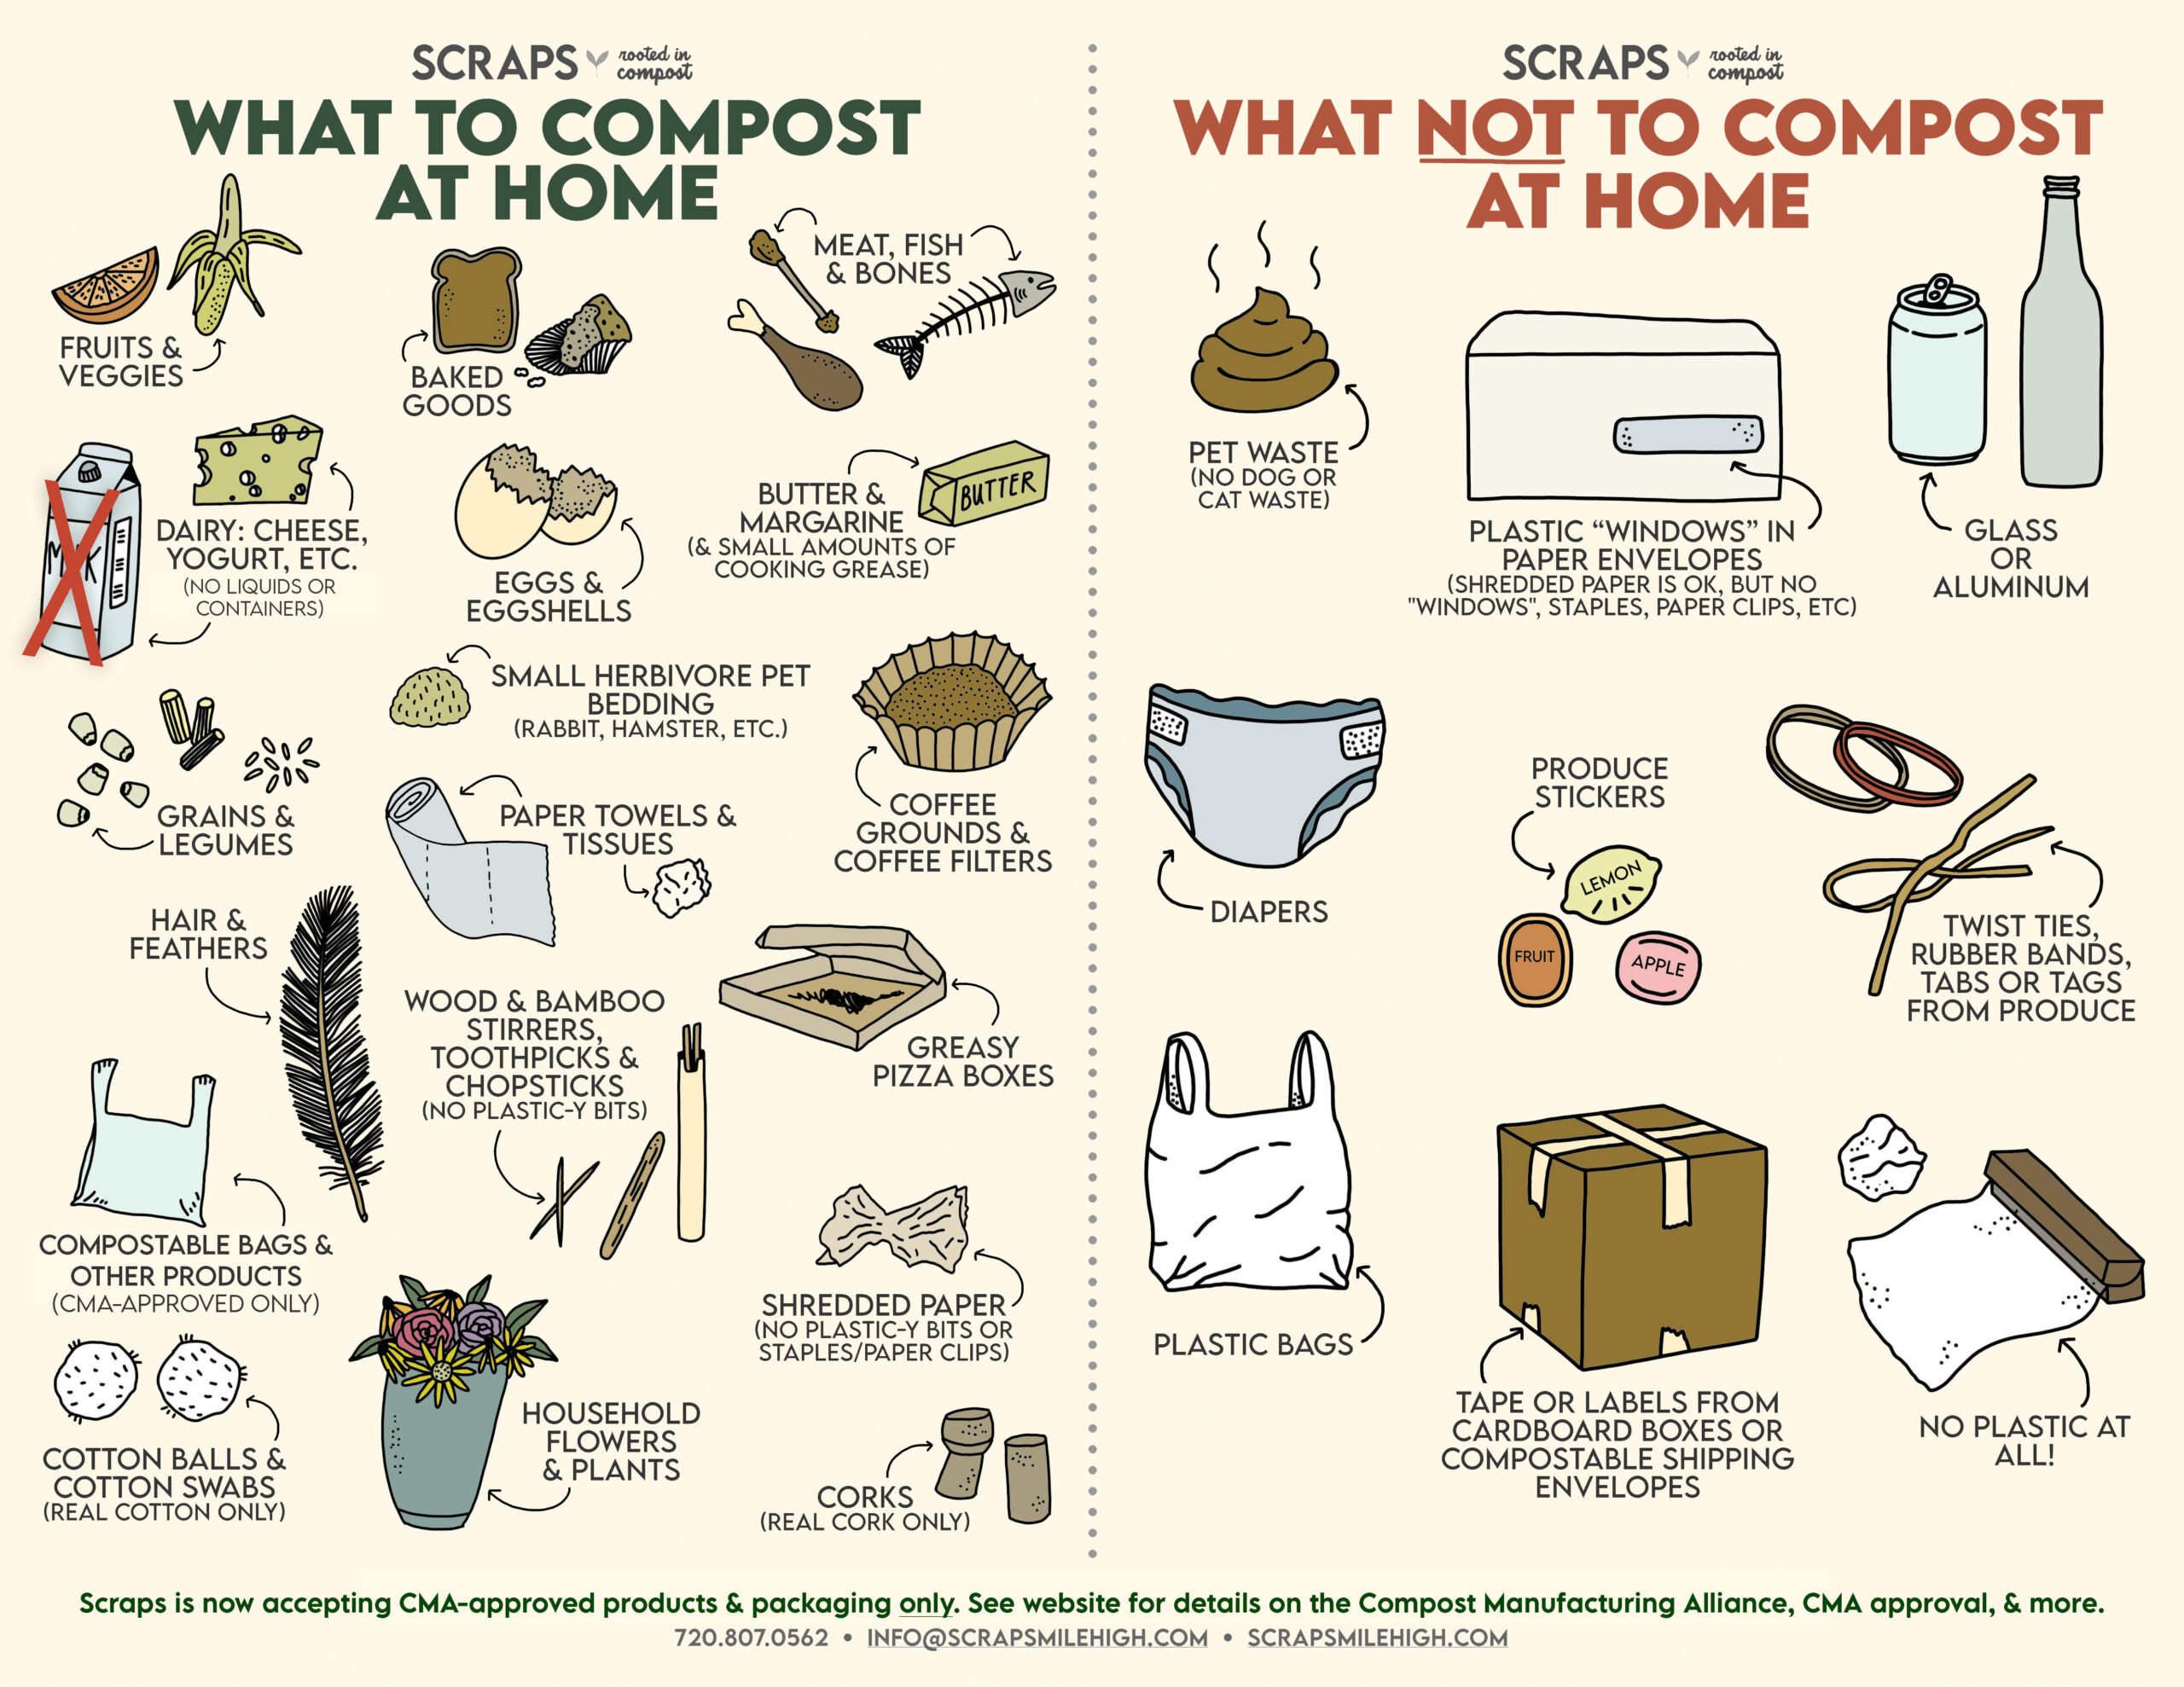 What can you compost with Scraps?